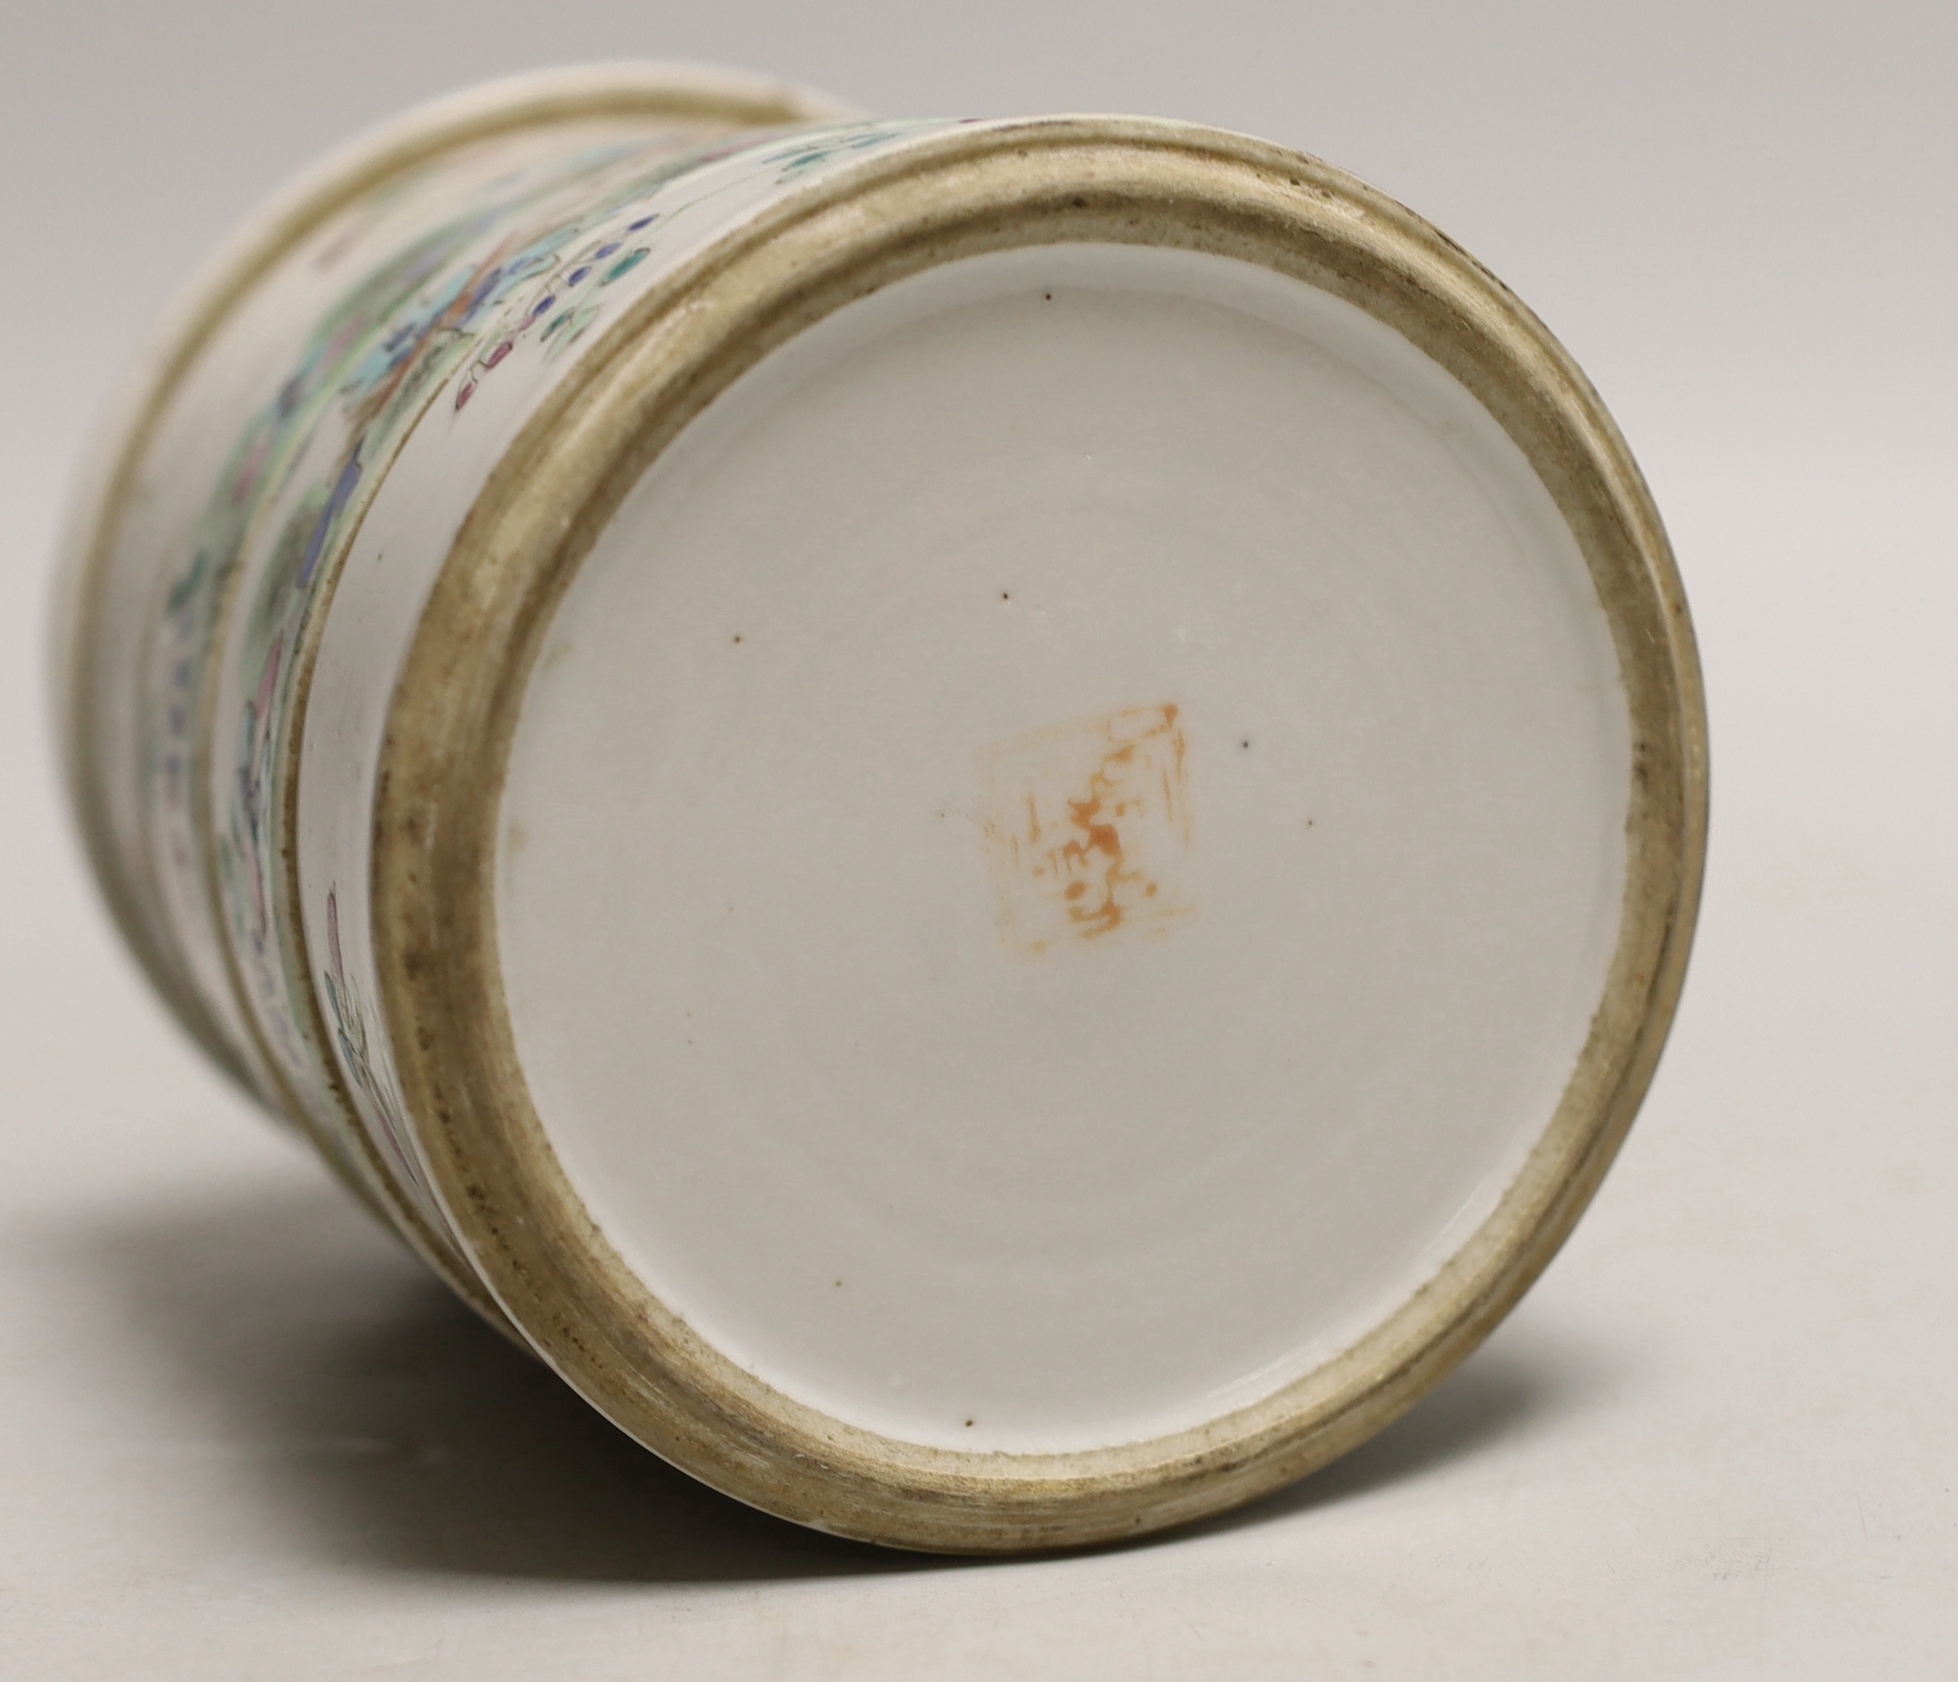 An early 20th century Chinese stacking food container, 13.5cm - Image 5 of 5